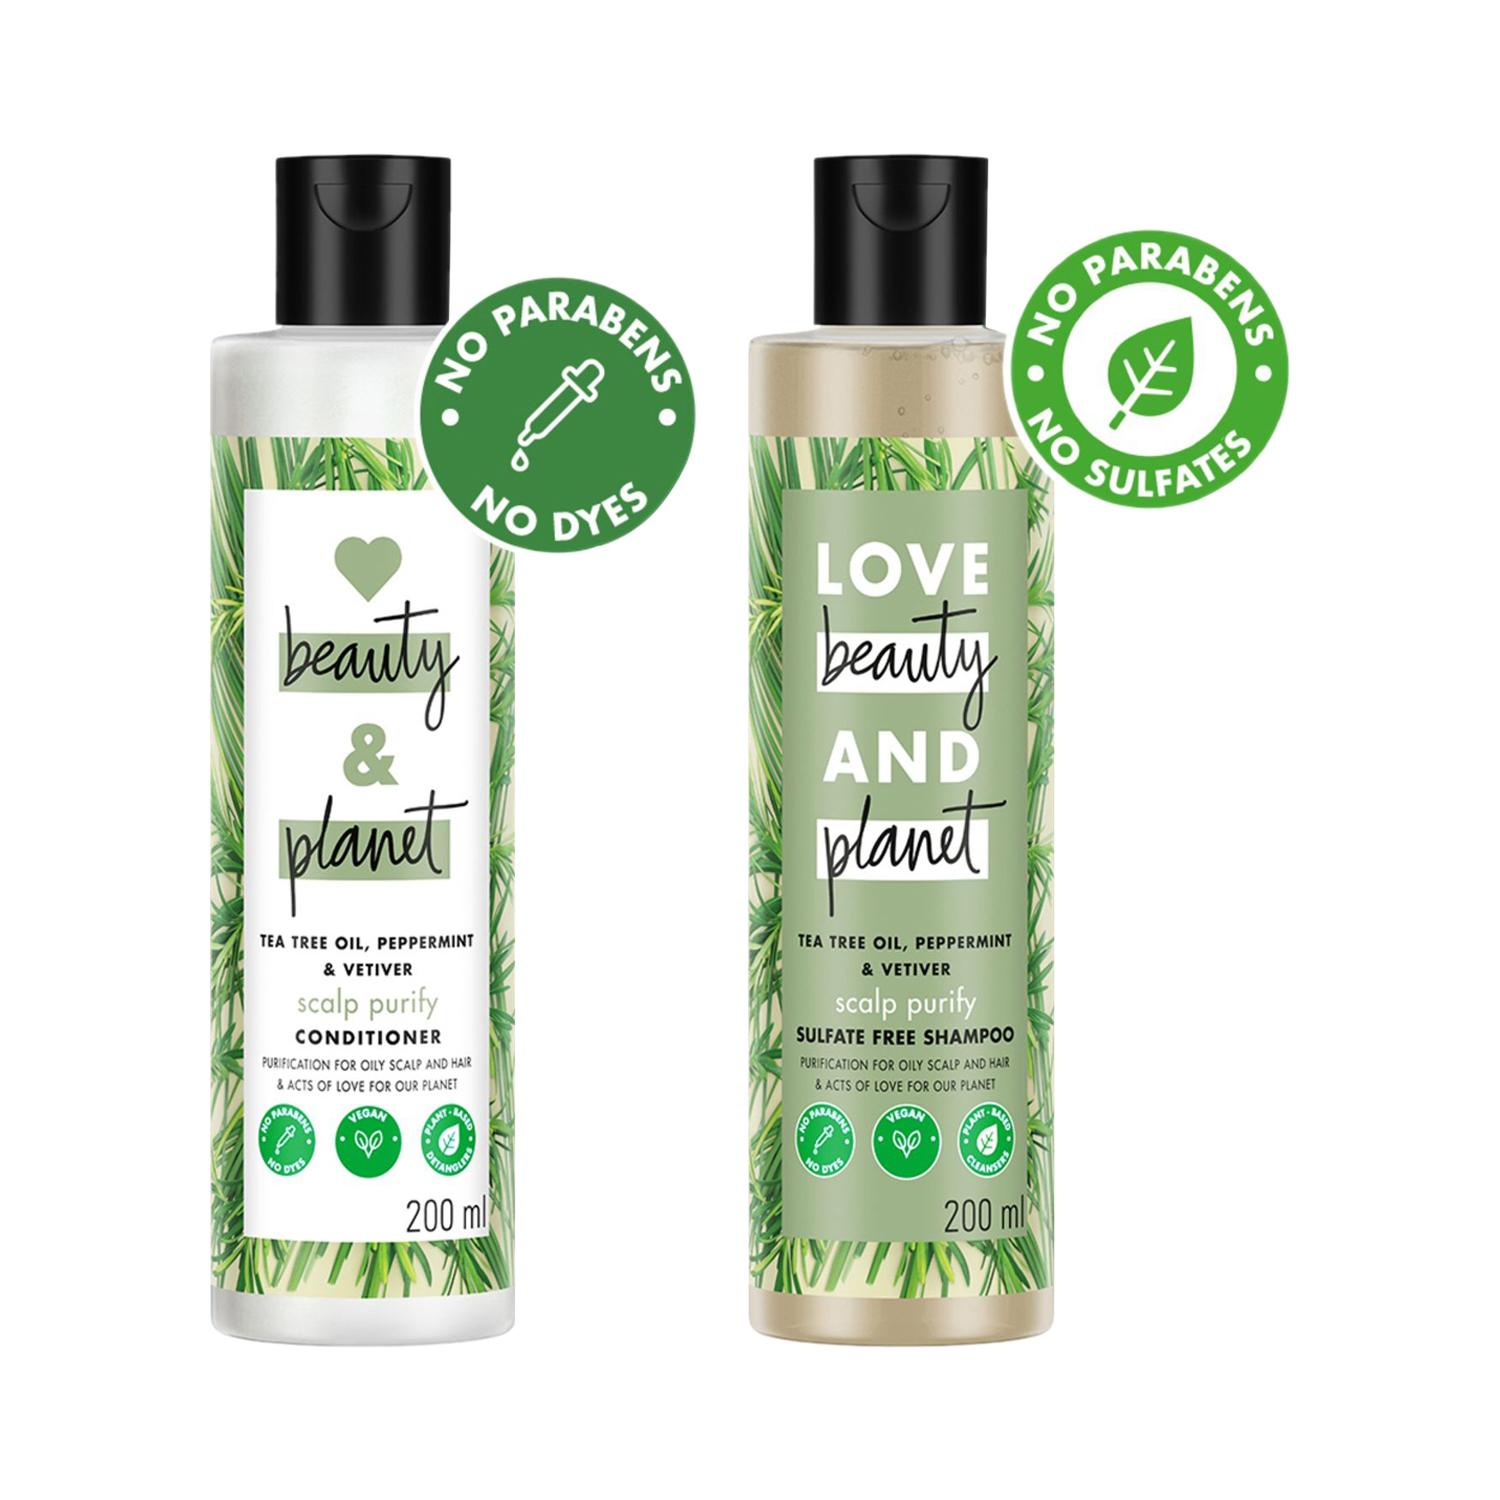 Love Beauty & Planet | Love Beauty & Planet Tea Tree, Peppermint & Vetiver Free Purifying Shampoo & Conditioner Combo